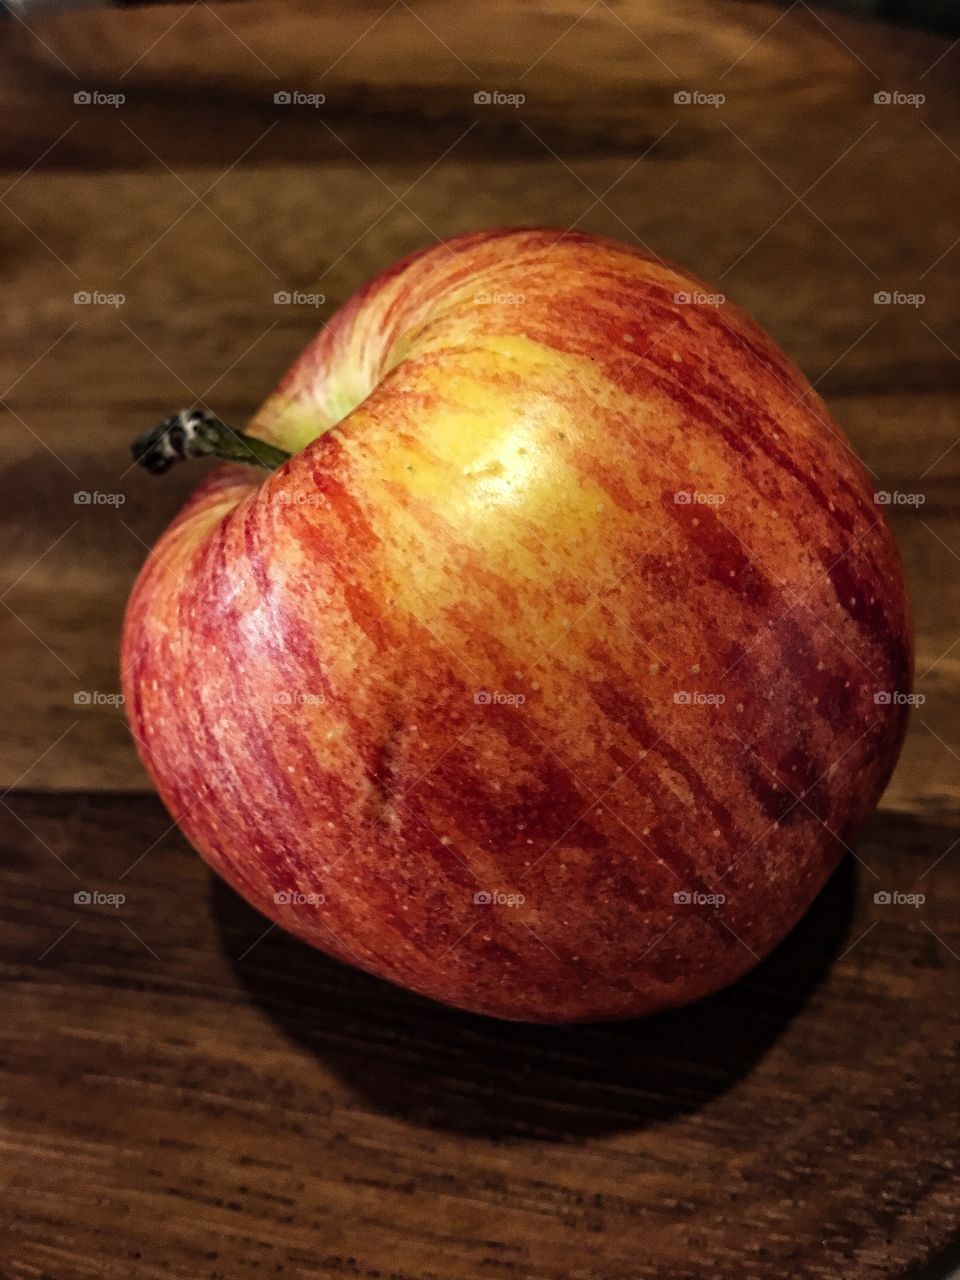 A vibrant looking apple.